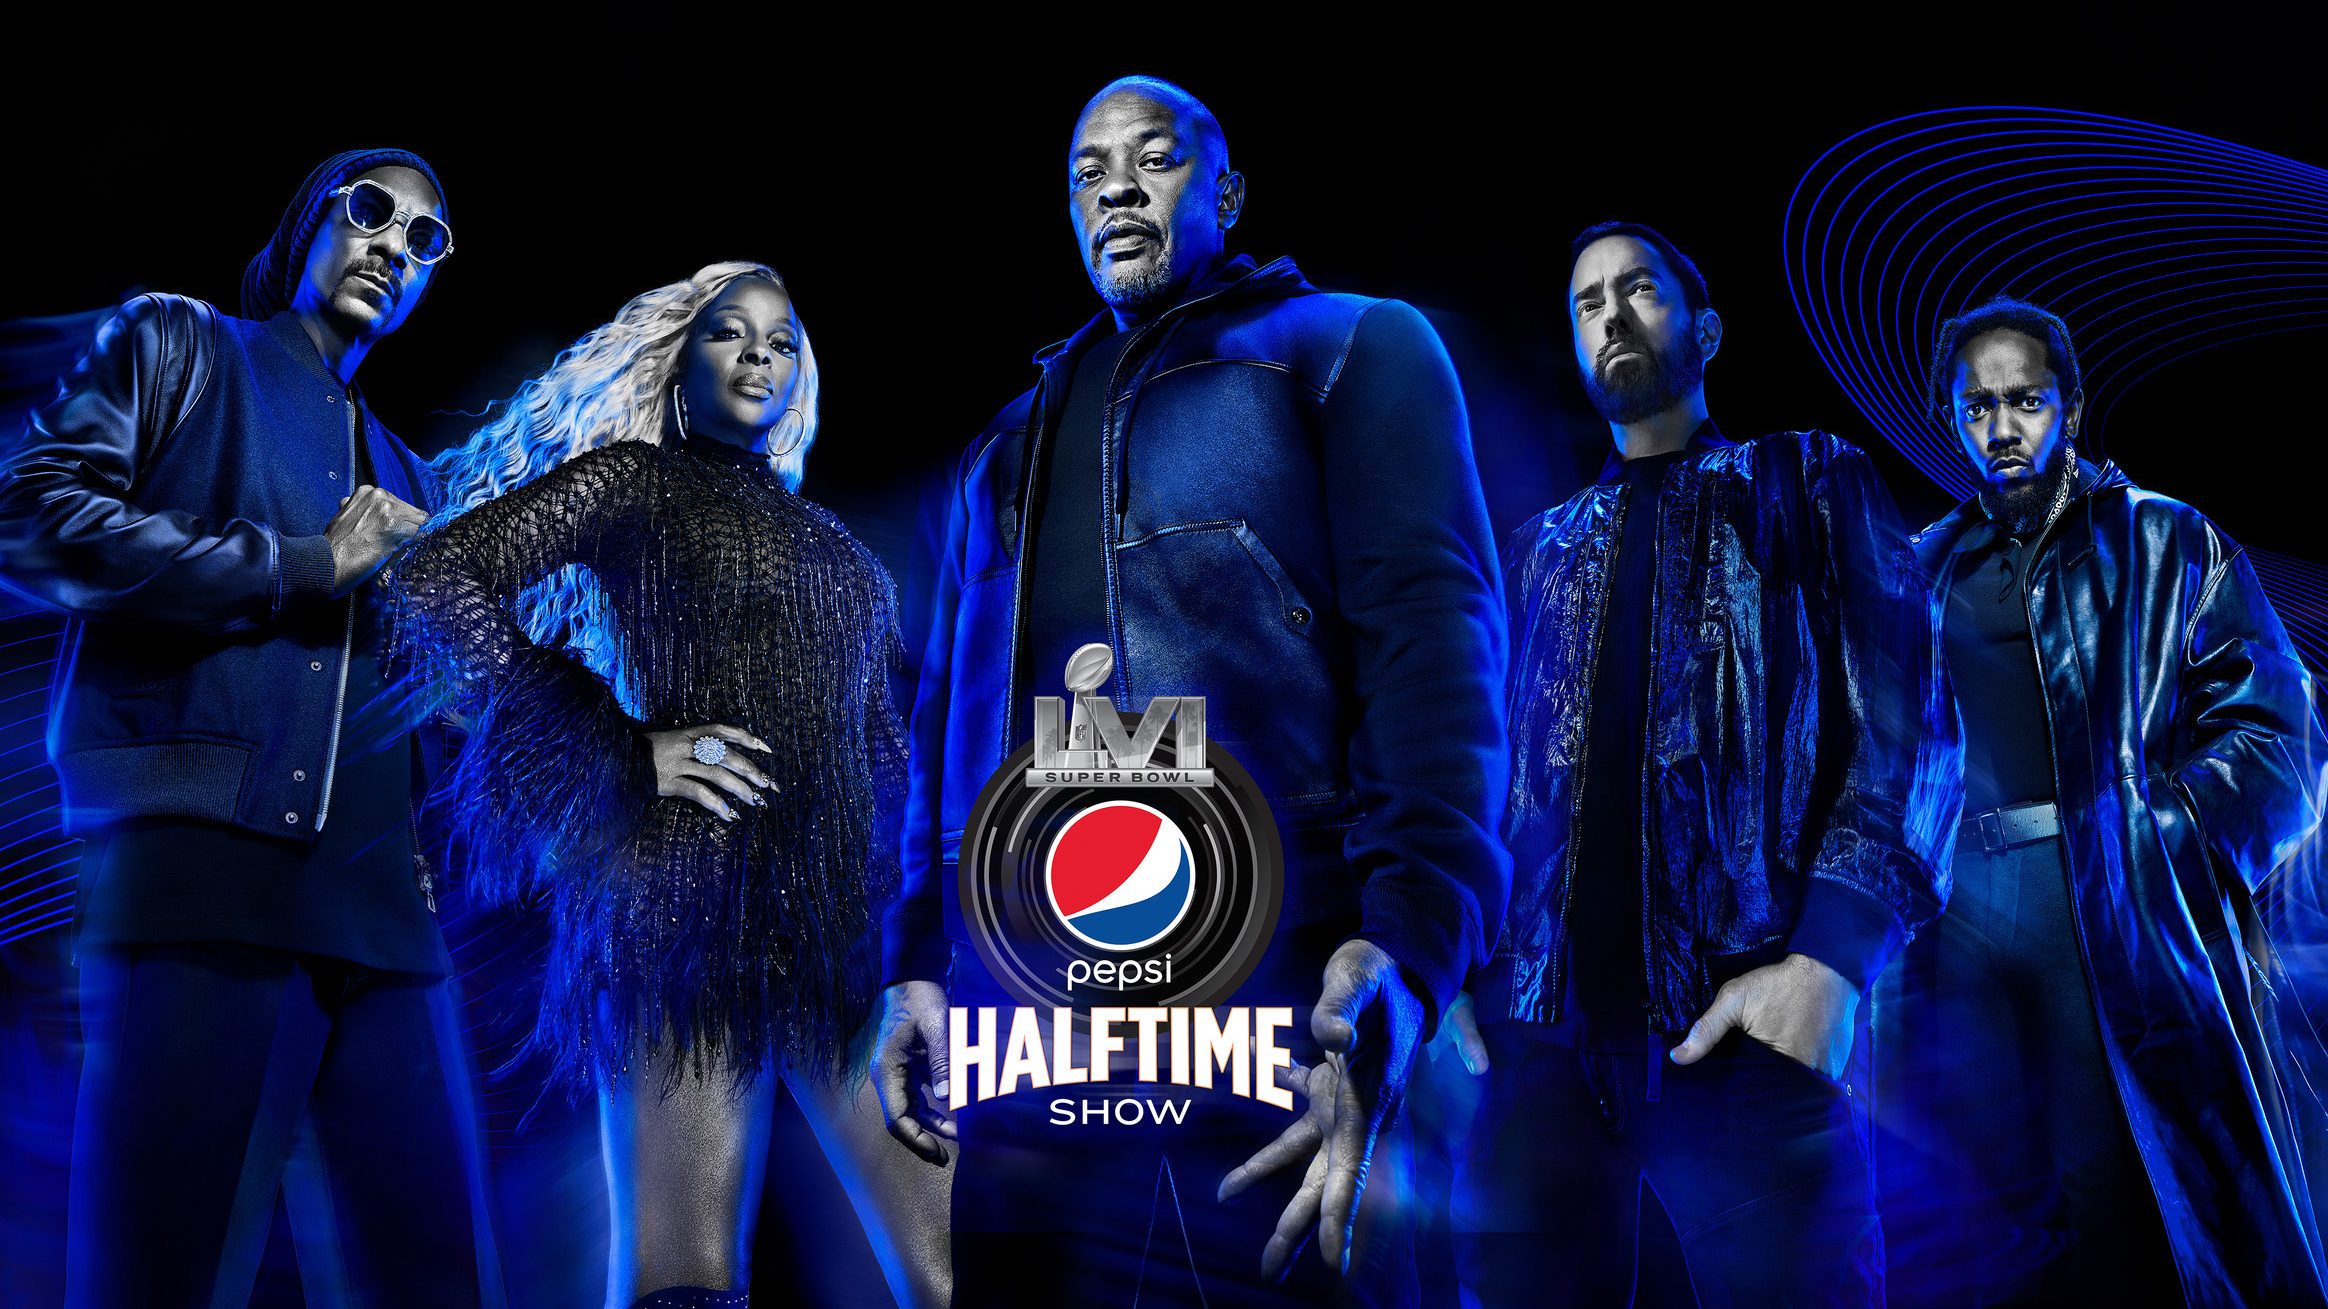 Super Bowl 2022 Halftime Show Cost How Much Is It This Year?